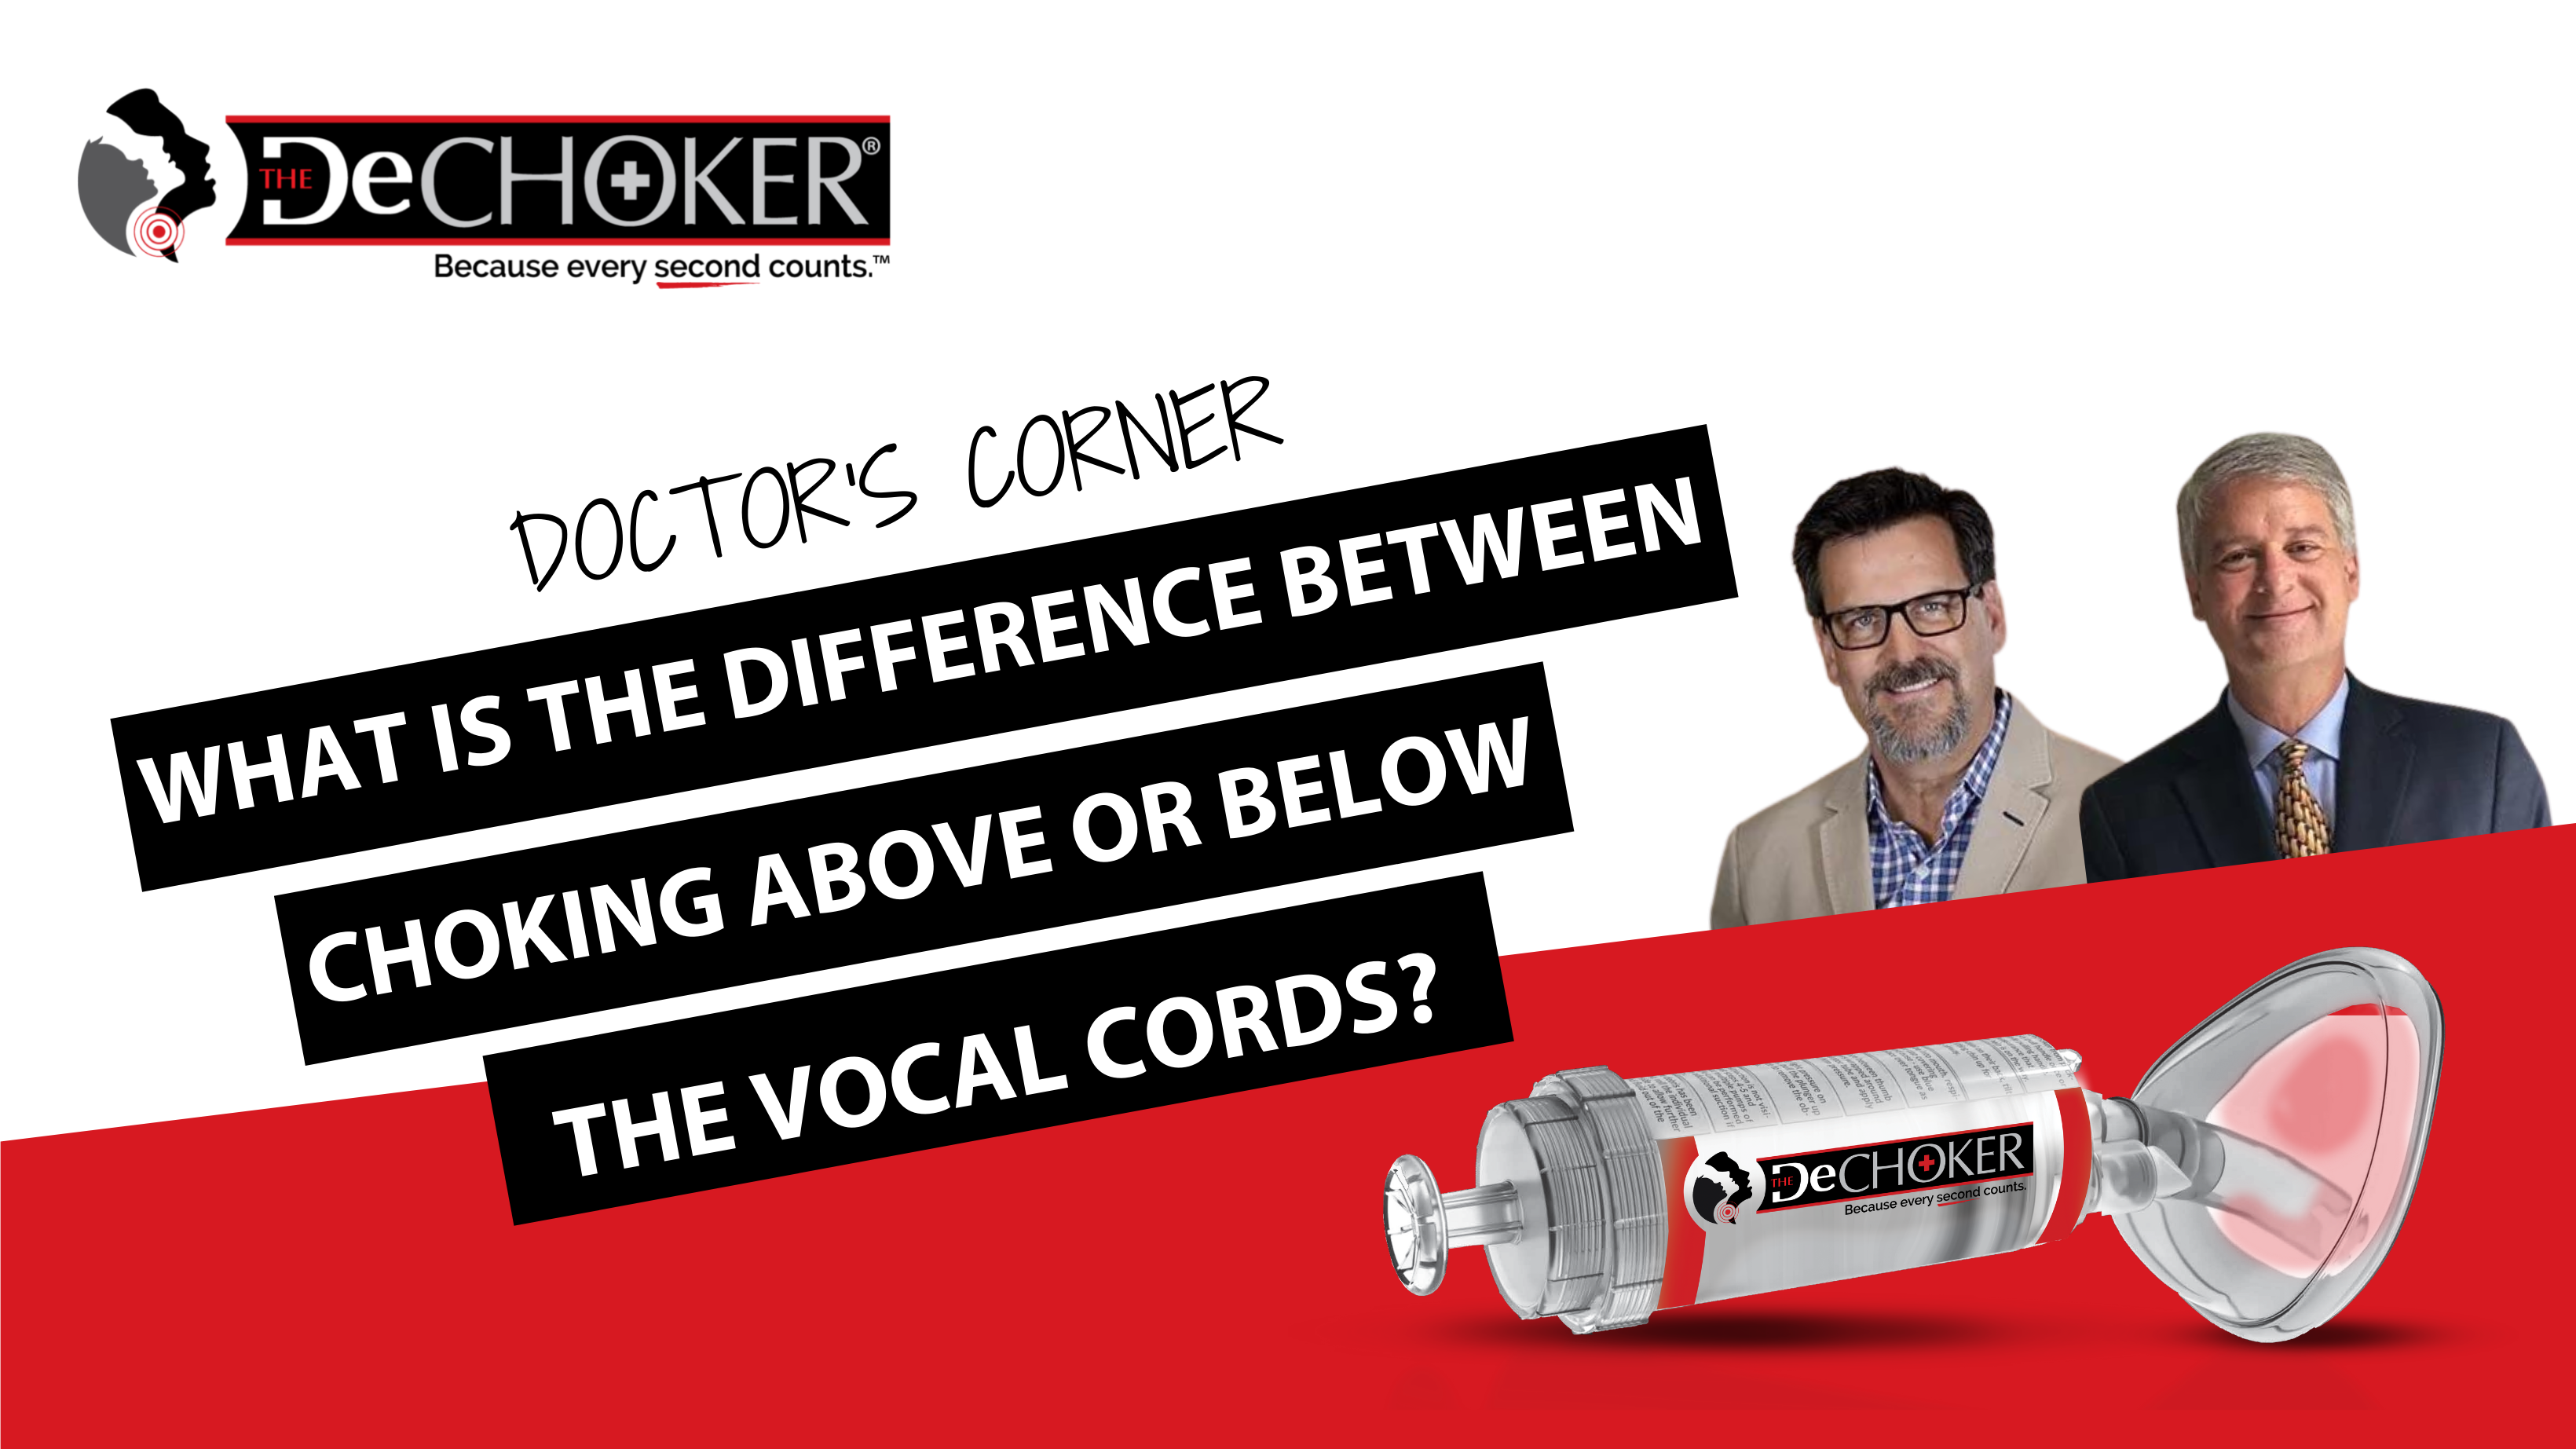 What is the difference between choking above or below the vocal cords?